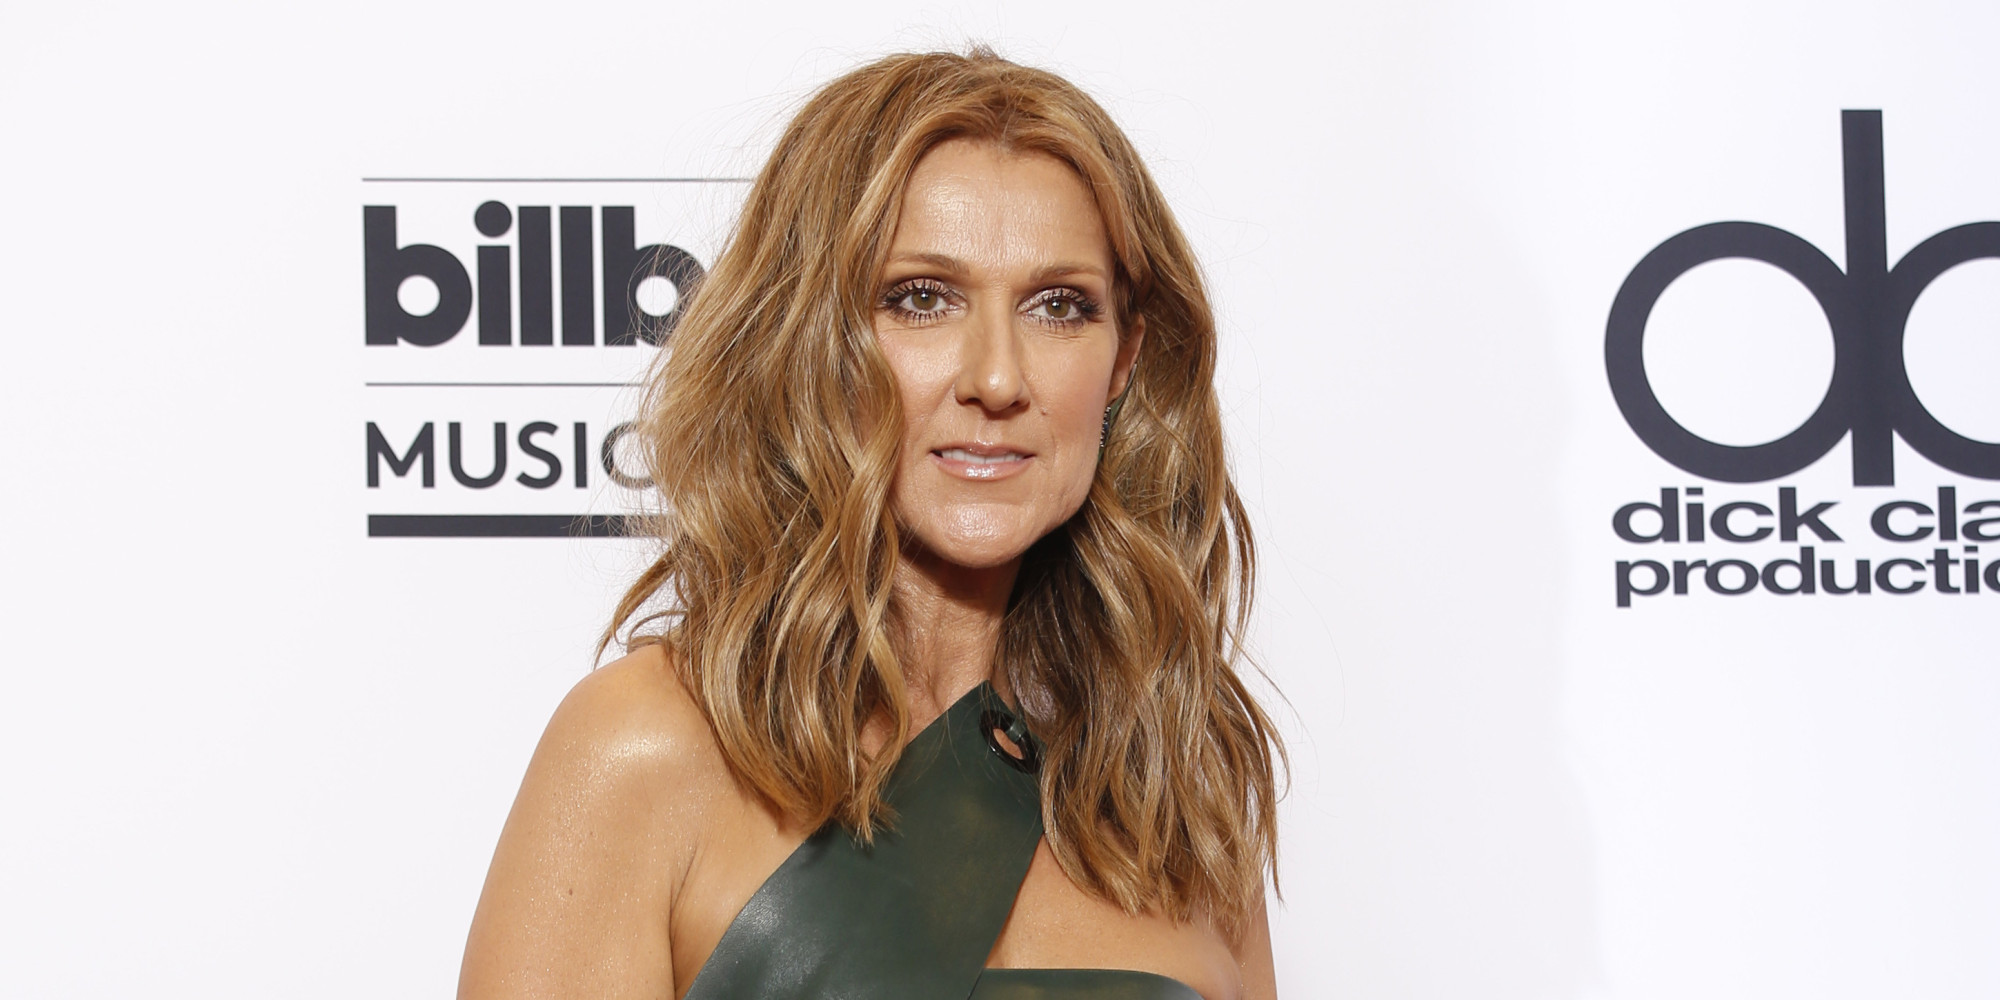 Celine Dion Wows In Leather Dress At The Billboard Music Awards | HuffPost